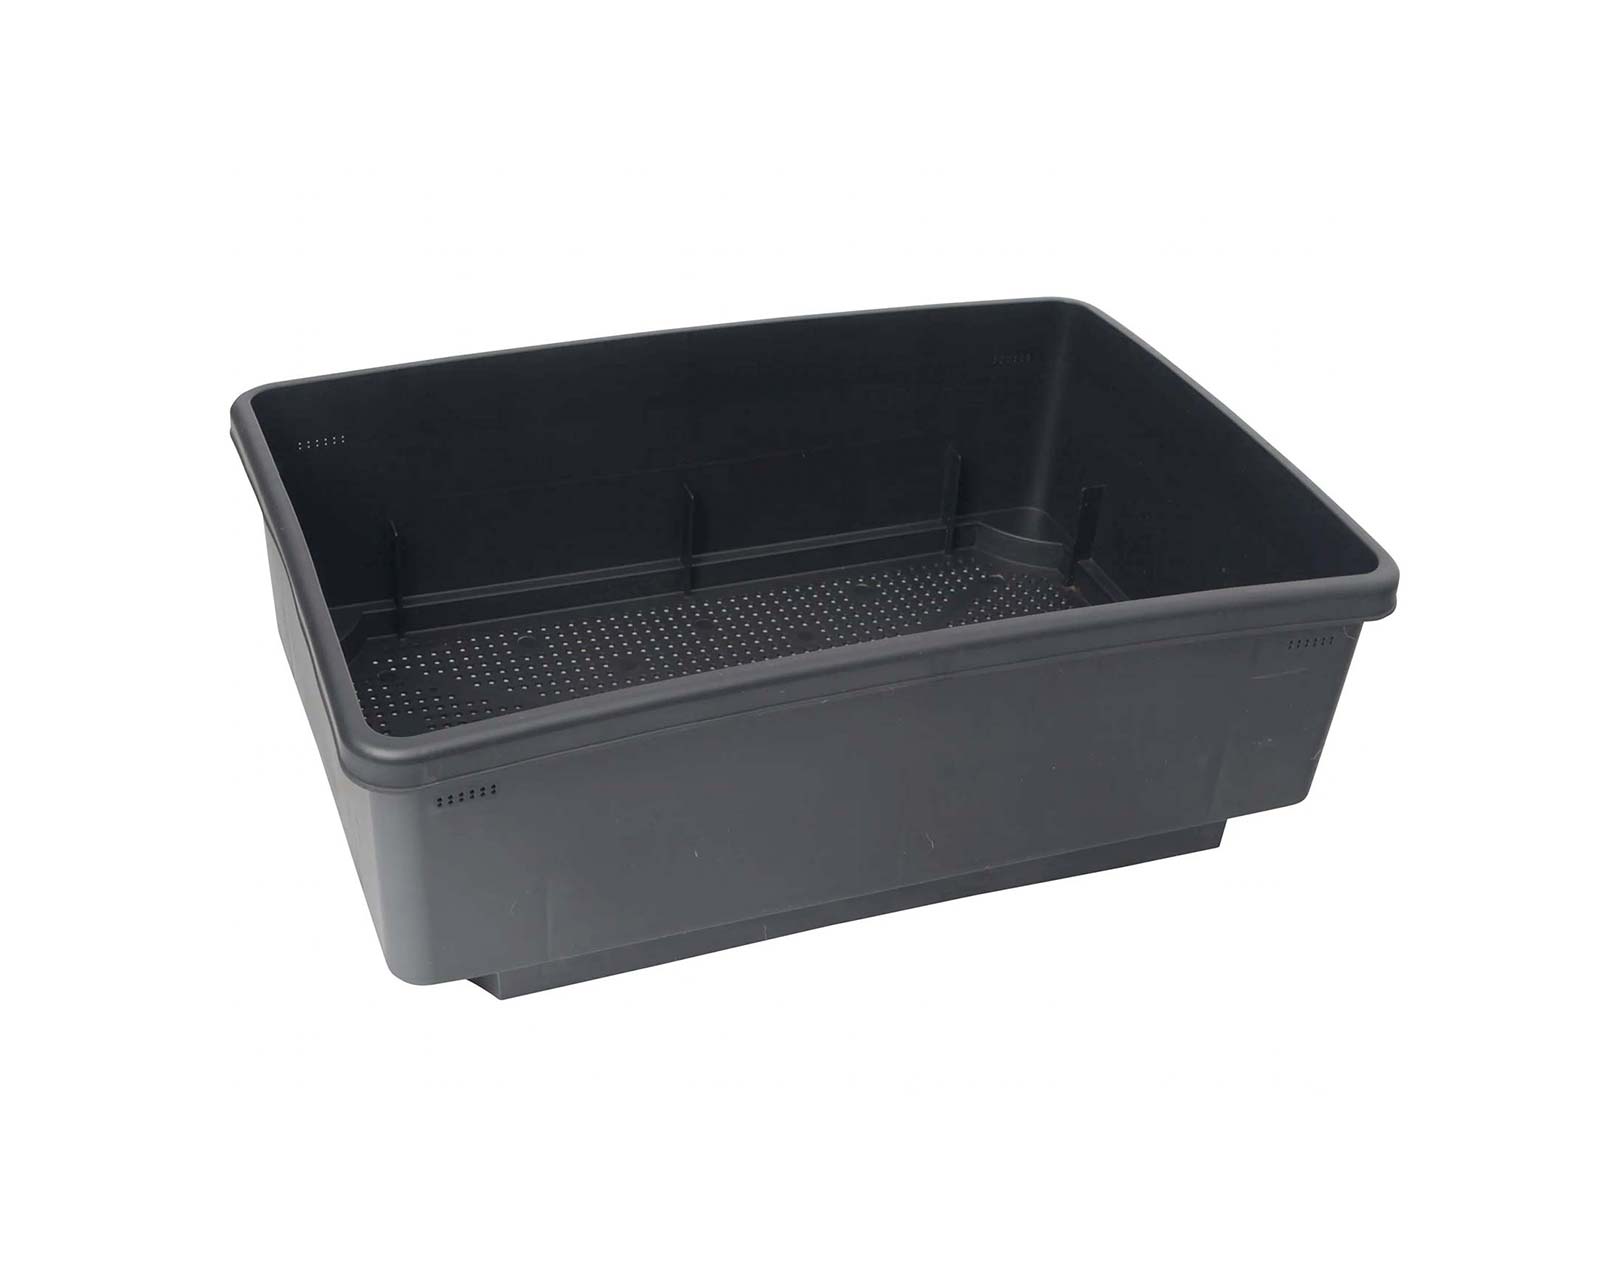 Tumbleweed Worm Cafe spare parts - Working Tray